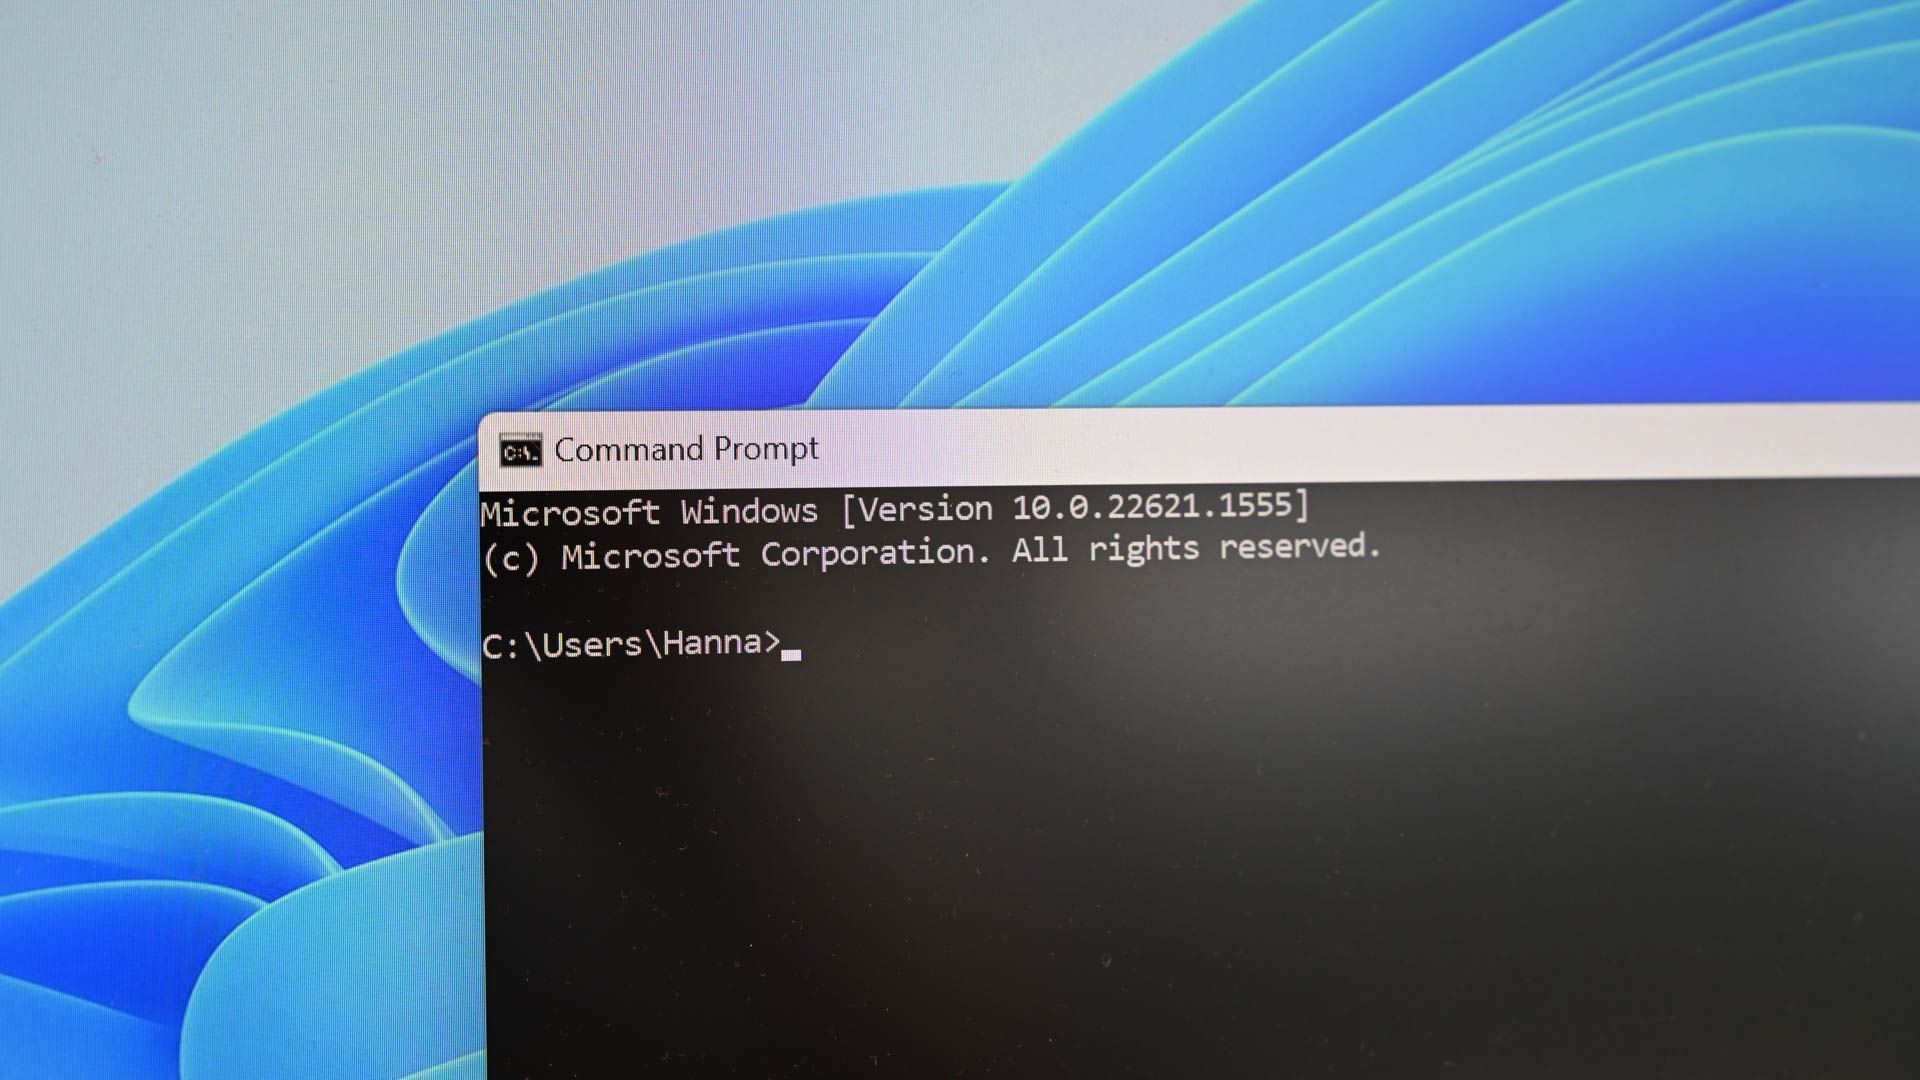 How to run Command Prompt (cmd.exe) as administrator in Windows 10?